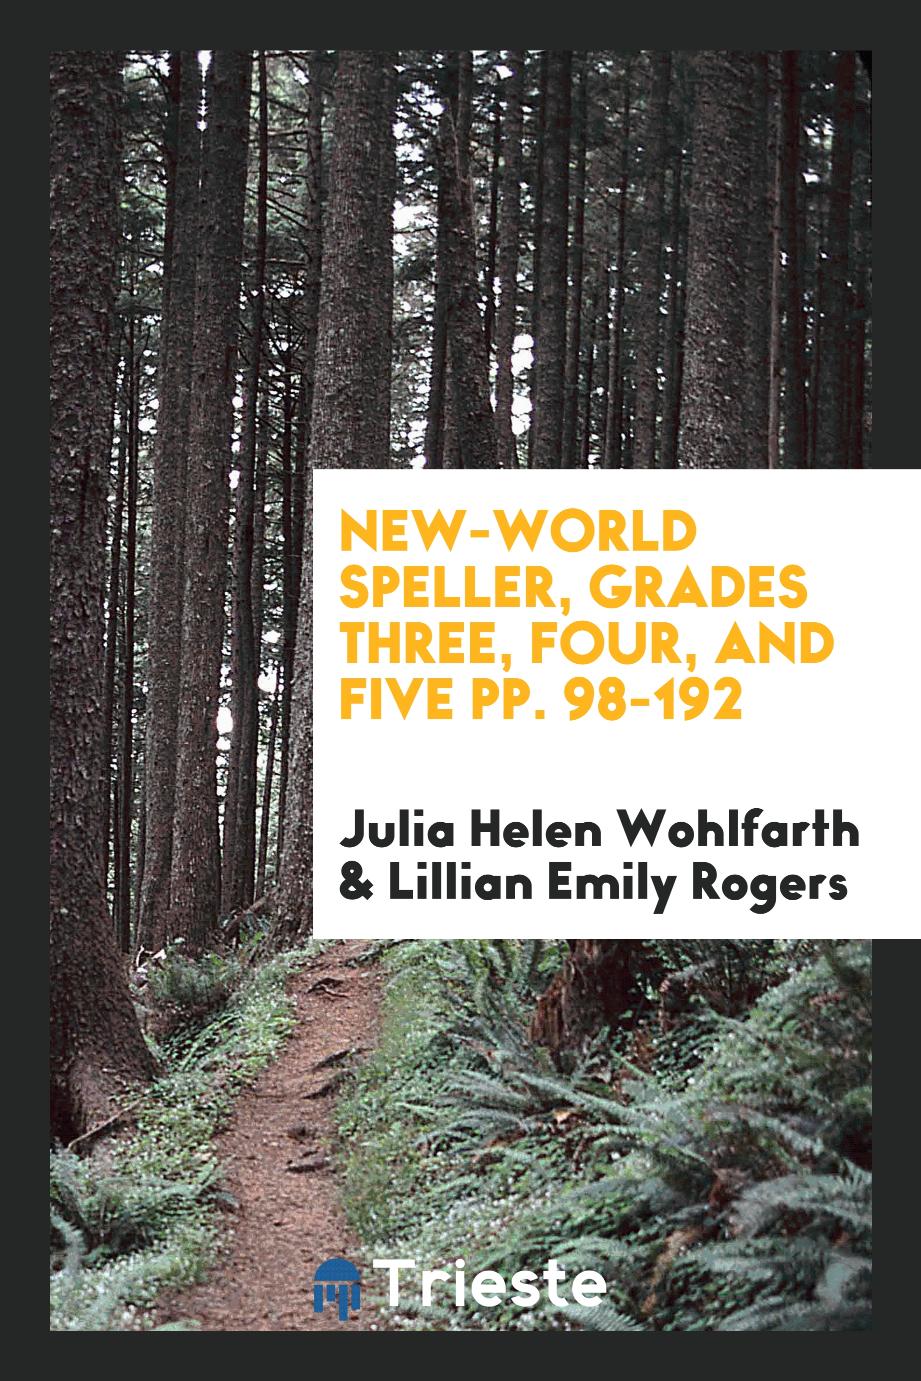 New-World Speller, Grades Three, Four, and Five pp. 98-192